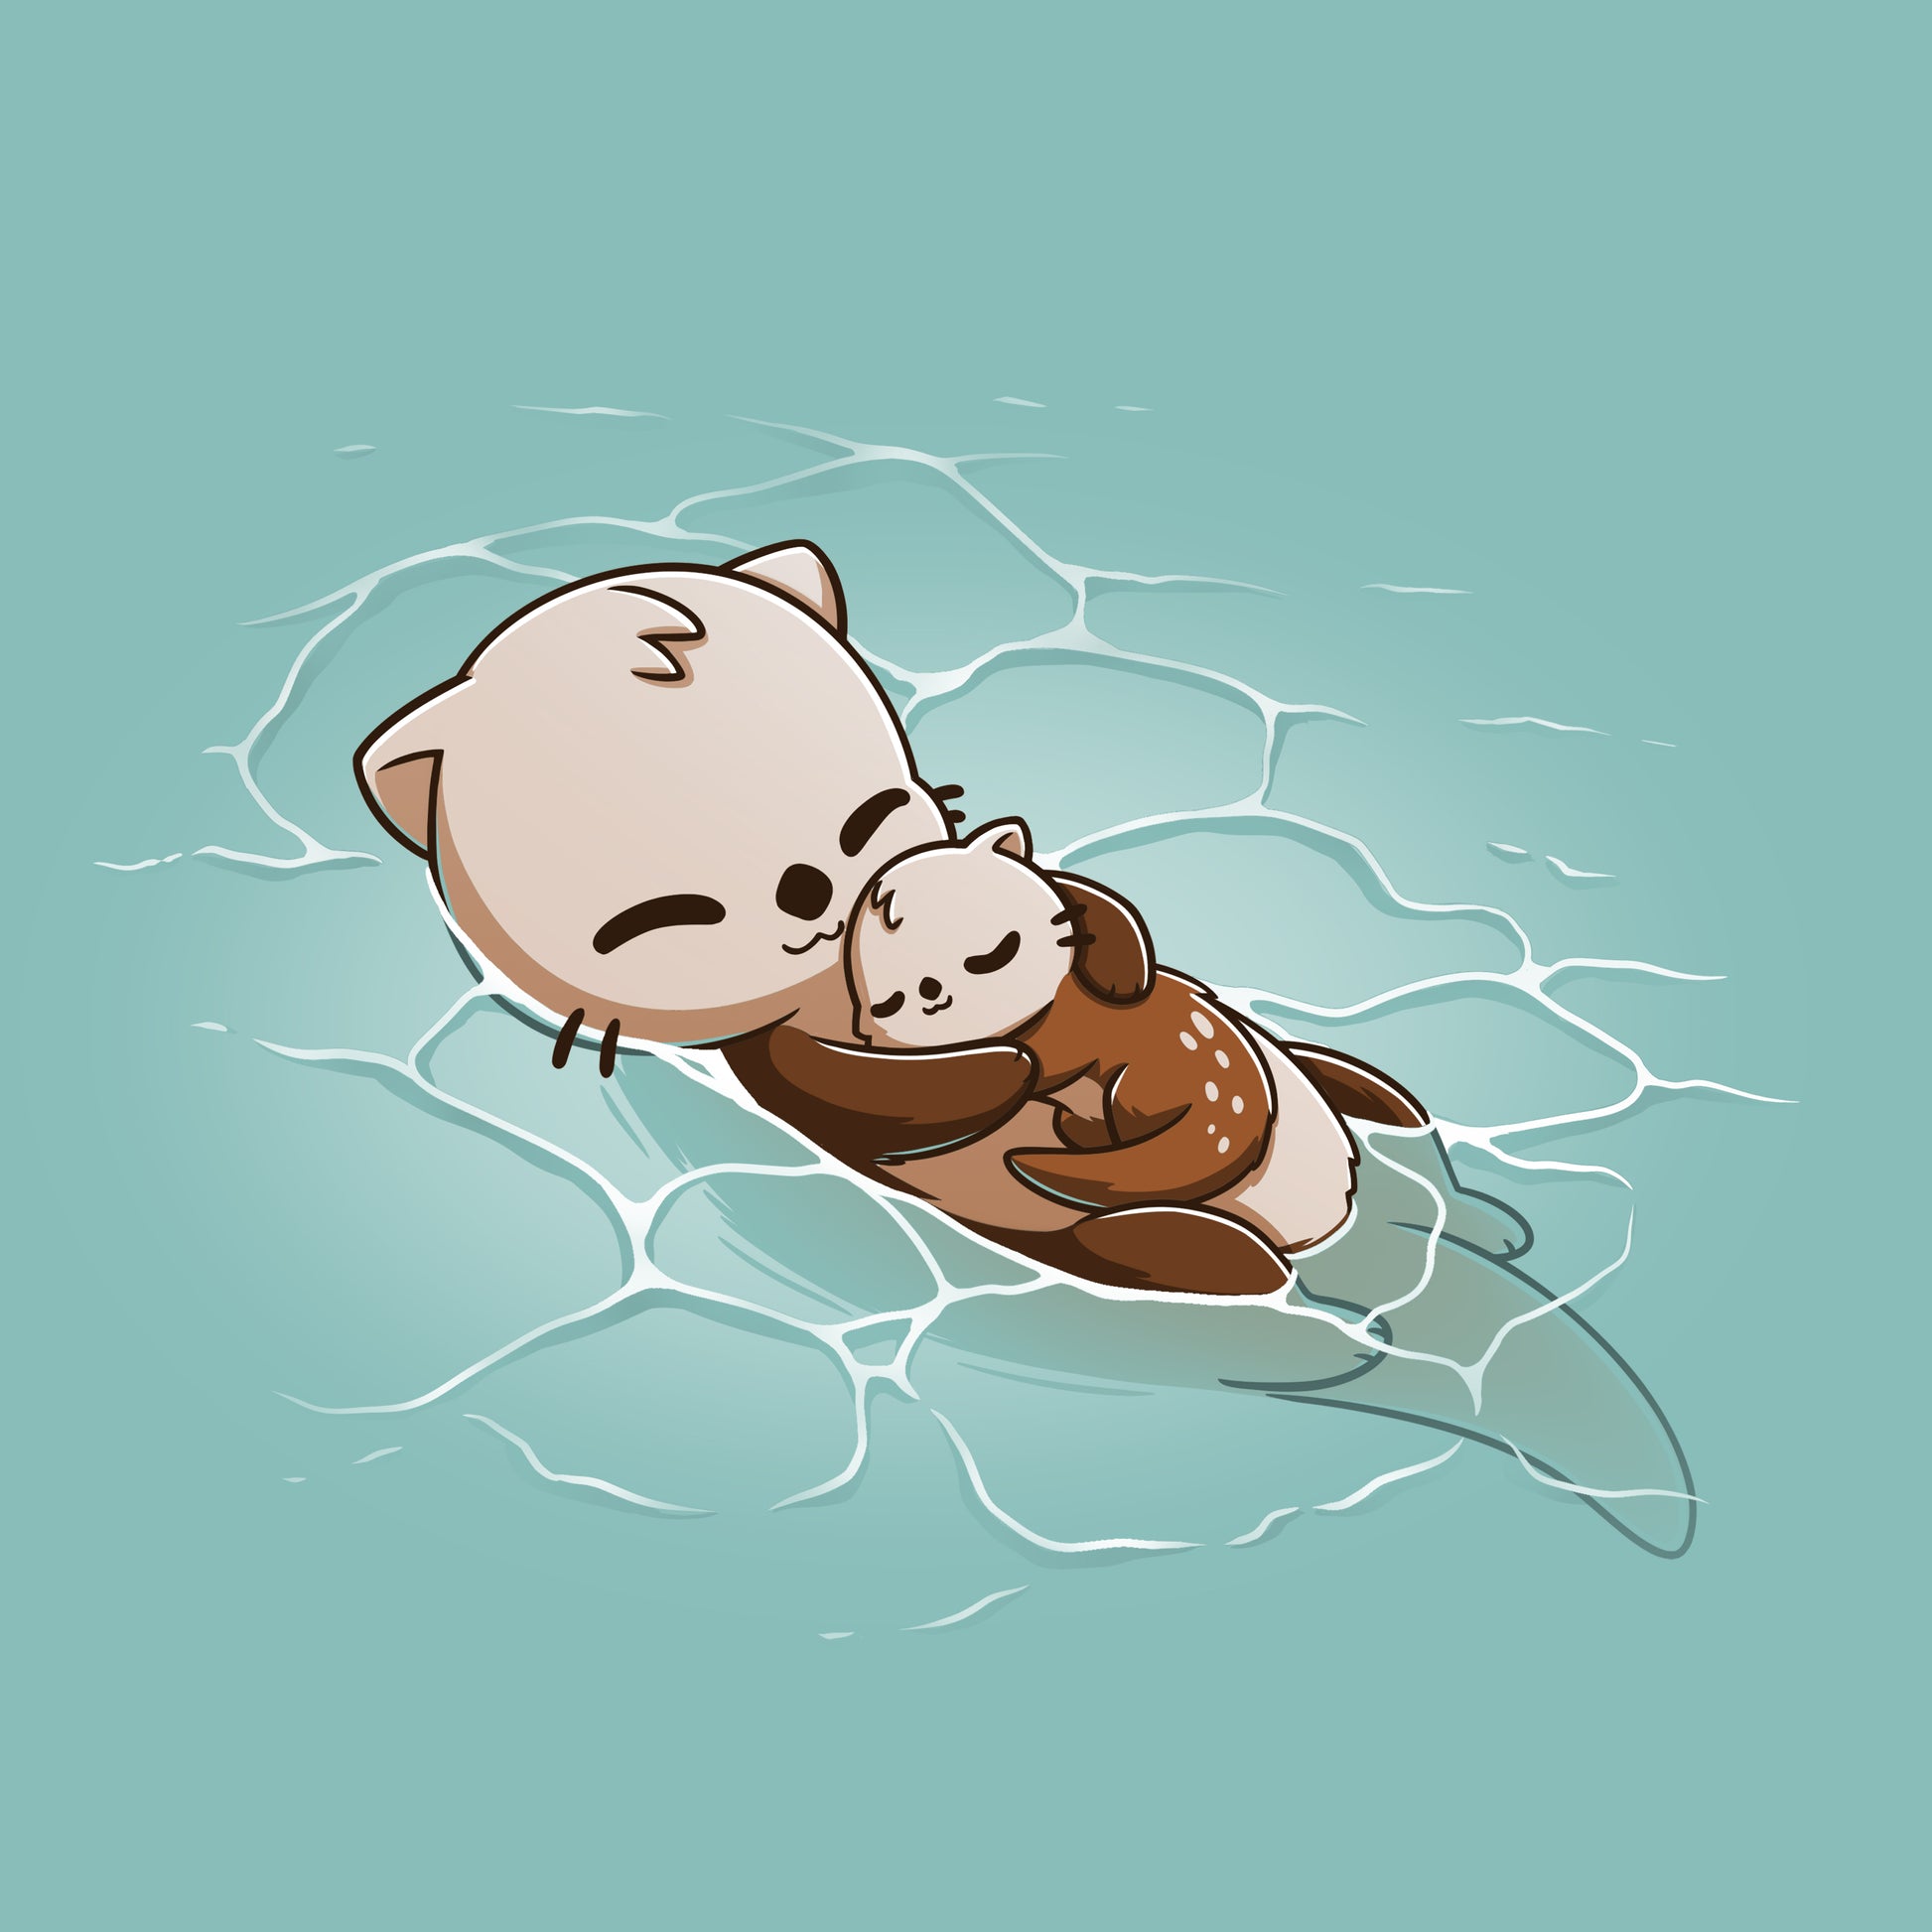 An adorable baby otter from Cuddly Otters joins its otter friend in the water. (Brand Name: TeeTurtle)